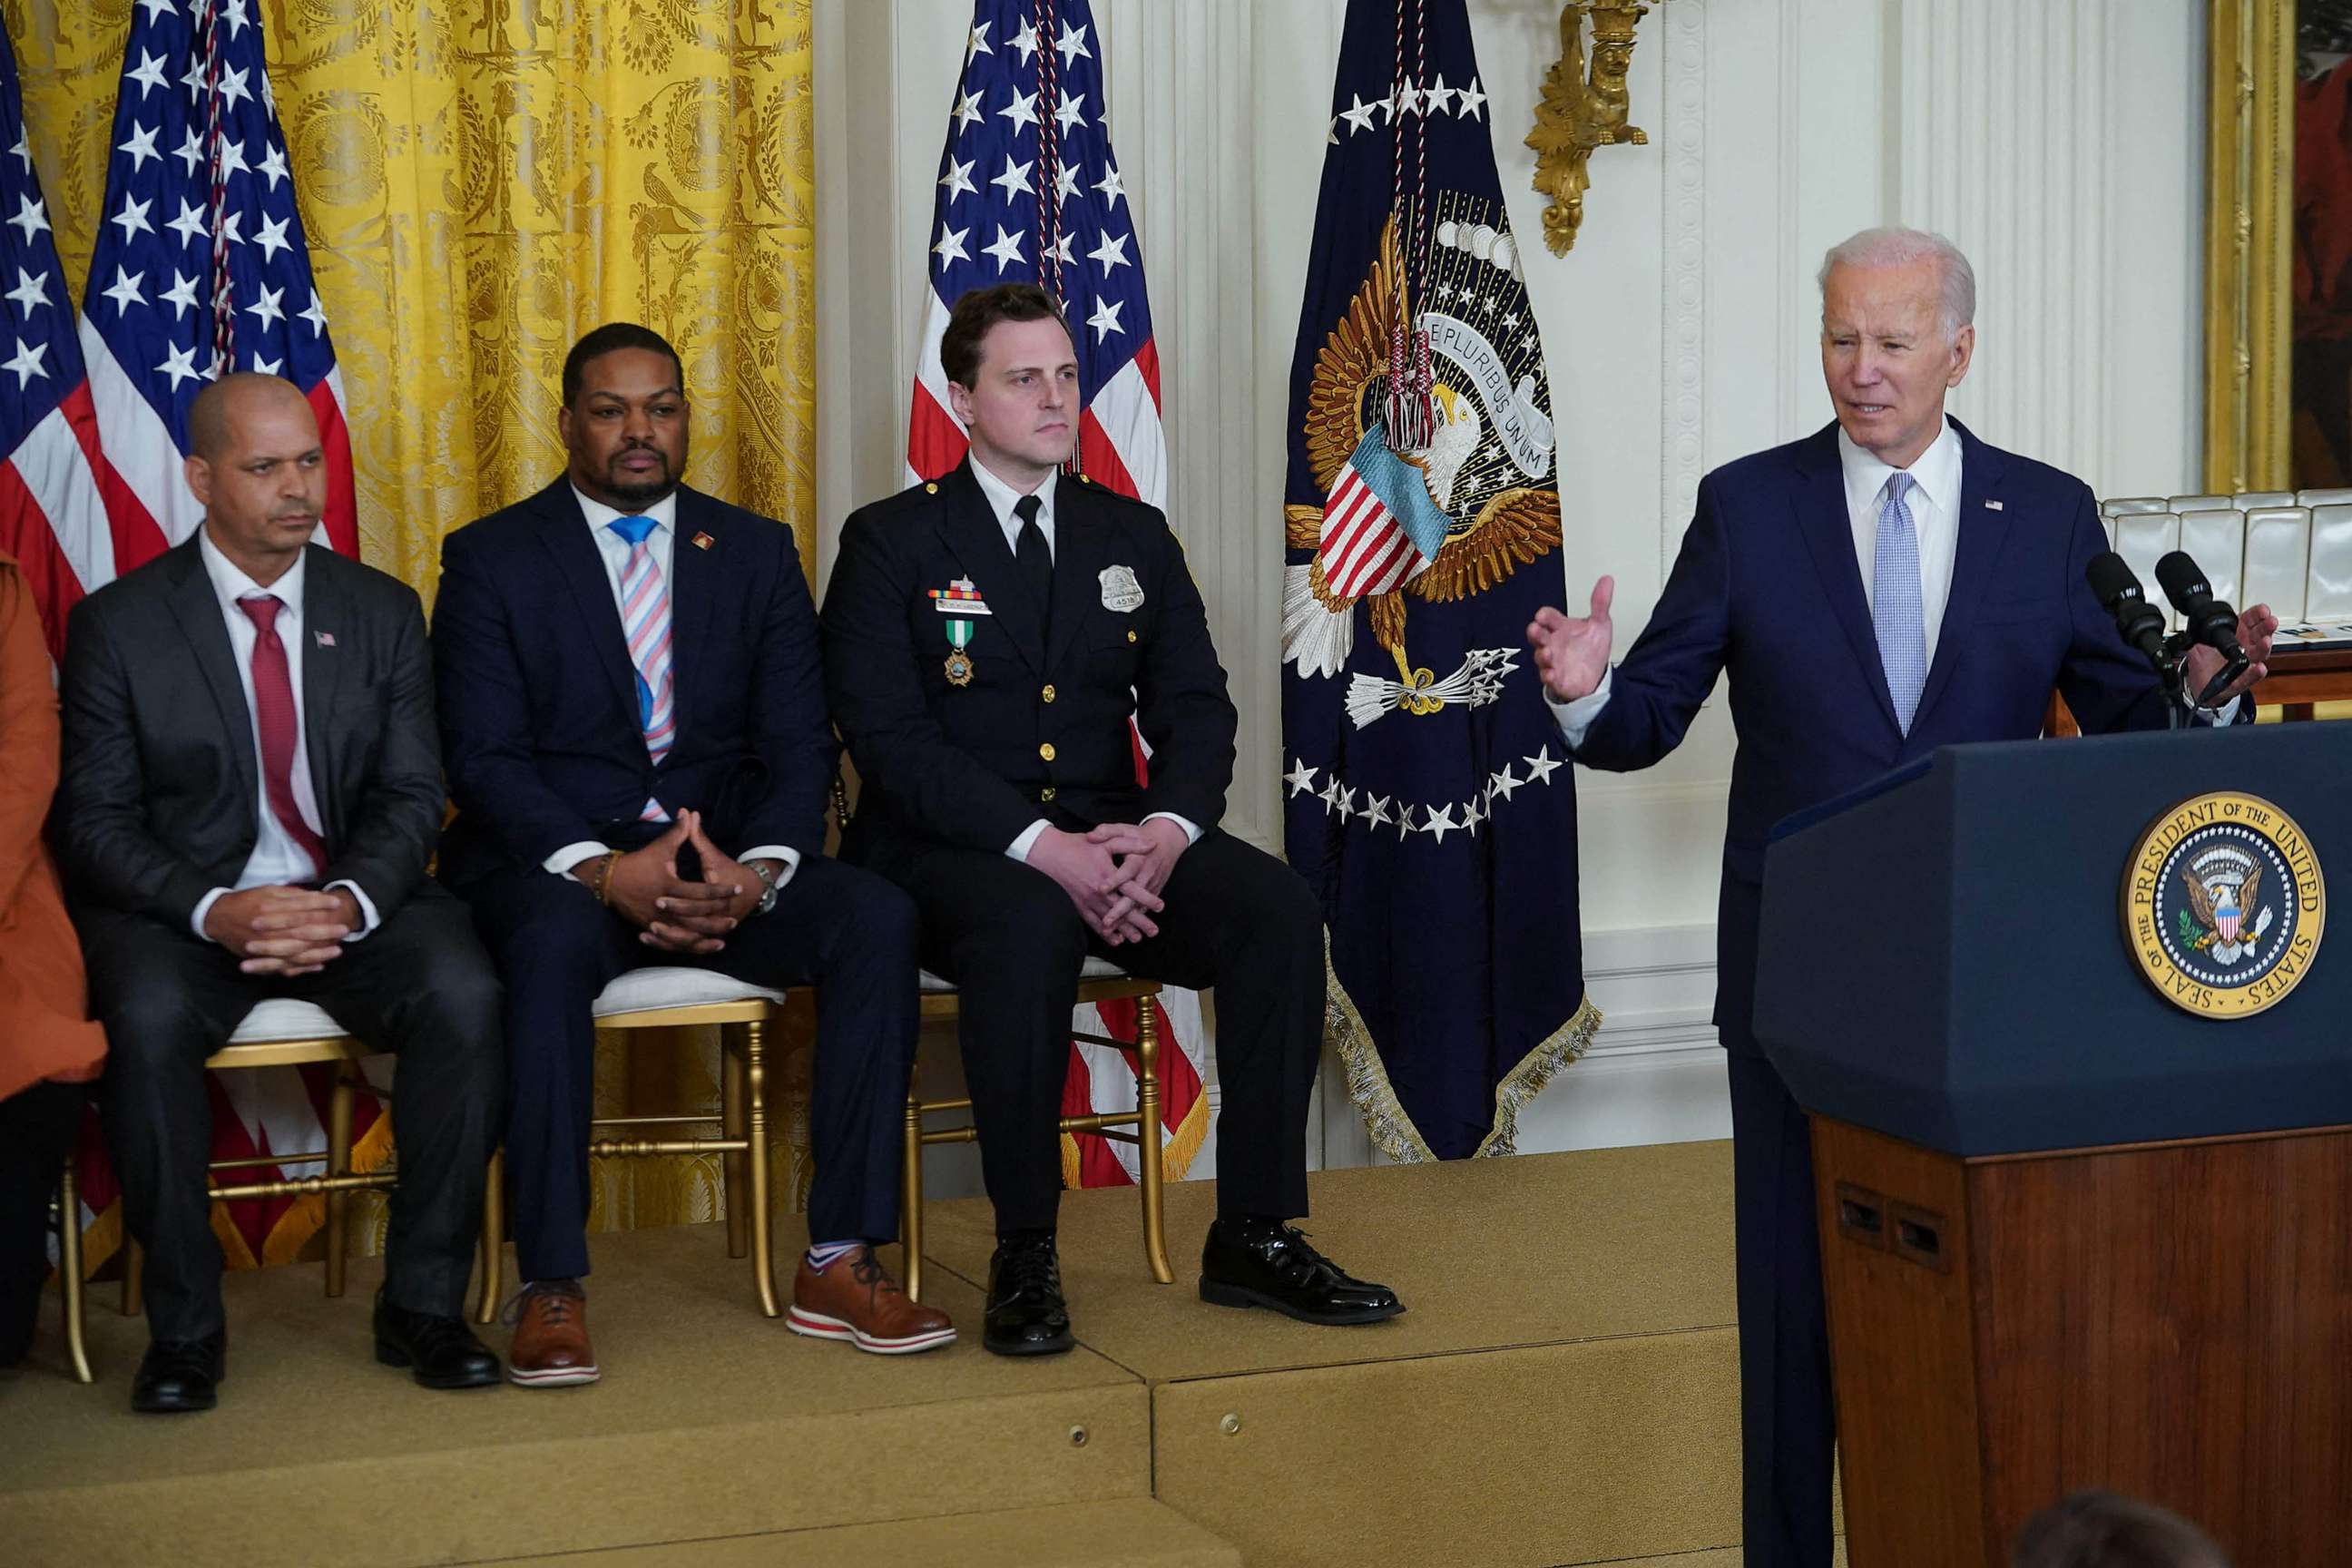 PHOTO: US President Joe Biden (R) speaks on the second anniversary of the January 6, 2021 attack on the US Capitol, during a ceremony in the East Room of the White House in Washington, DC, Jan. 6, 2023.